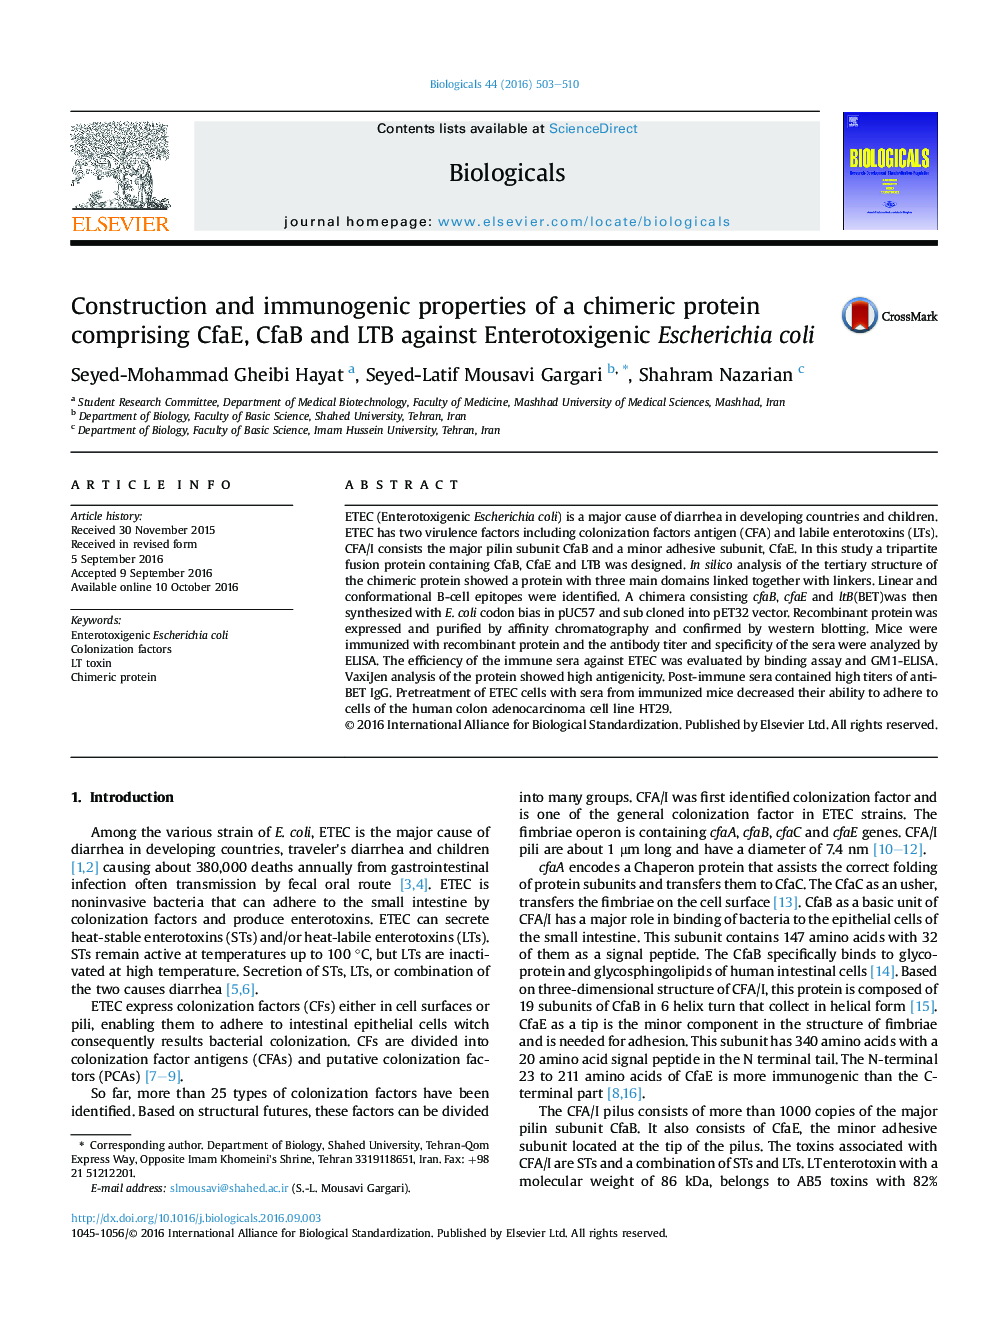 Construction and immunogenic properties of a chimeric protein comprising CfaE, CfaB and LTB against Enterotoxigenic Escherichia coli